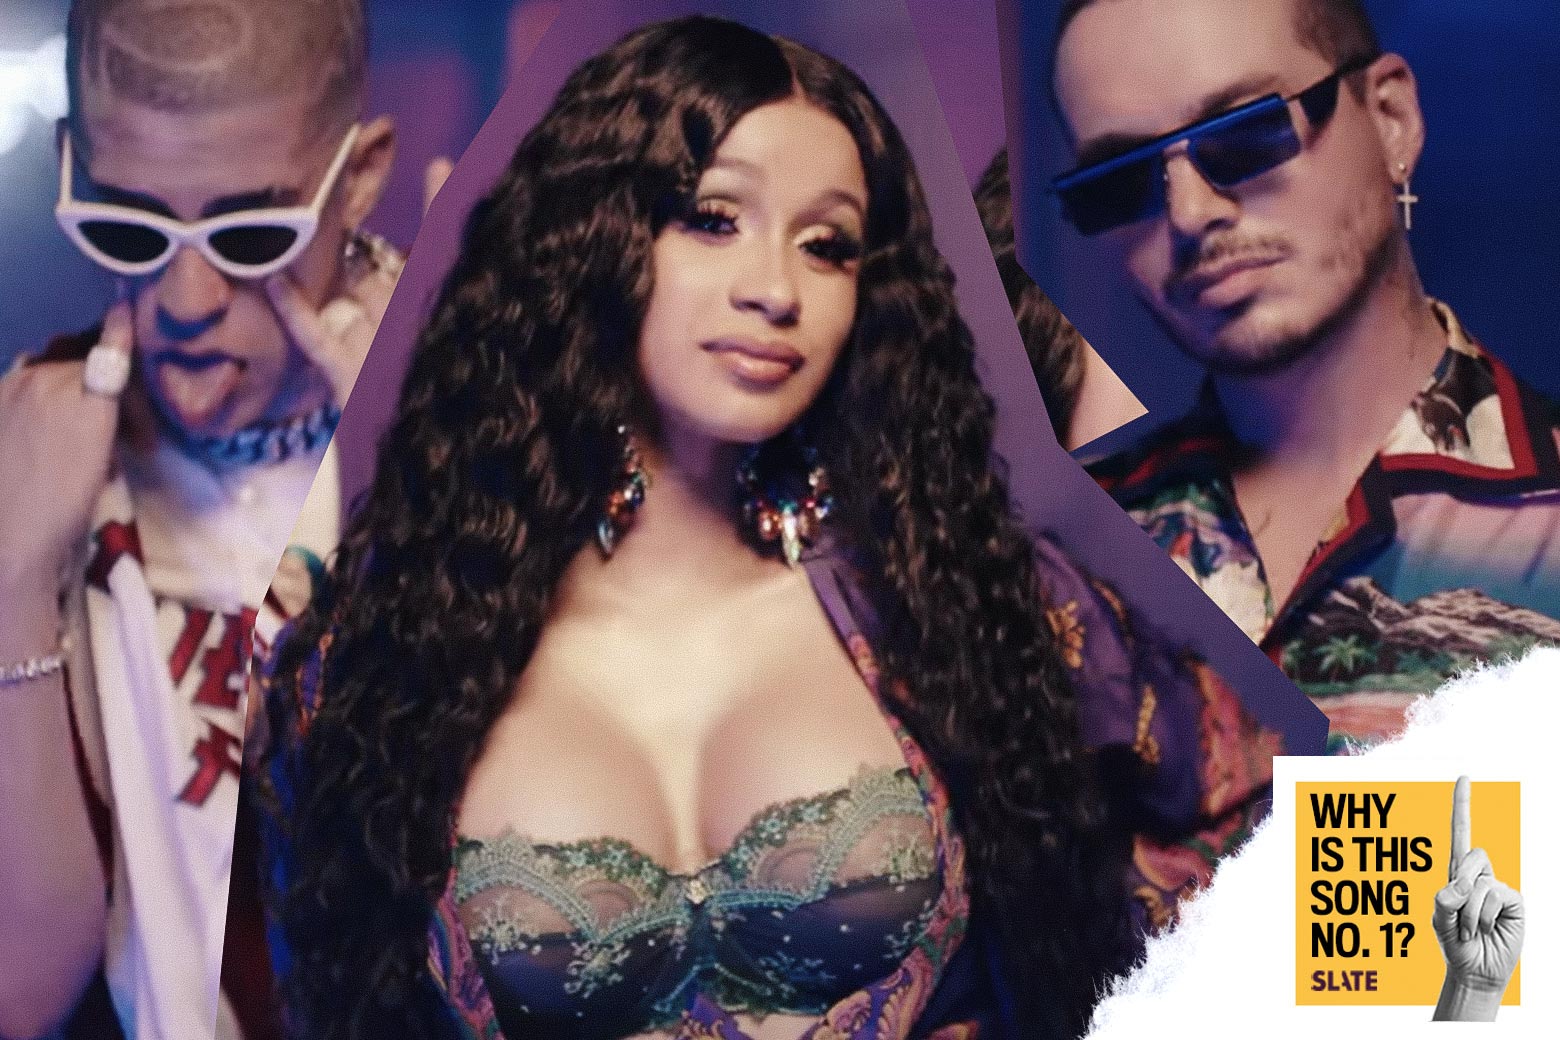 Cardi B, Bad Bunny, and J Balvin in the music video for "I Like It."